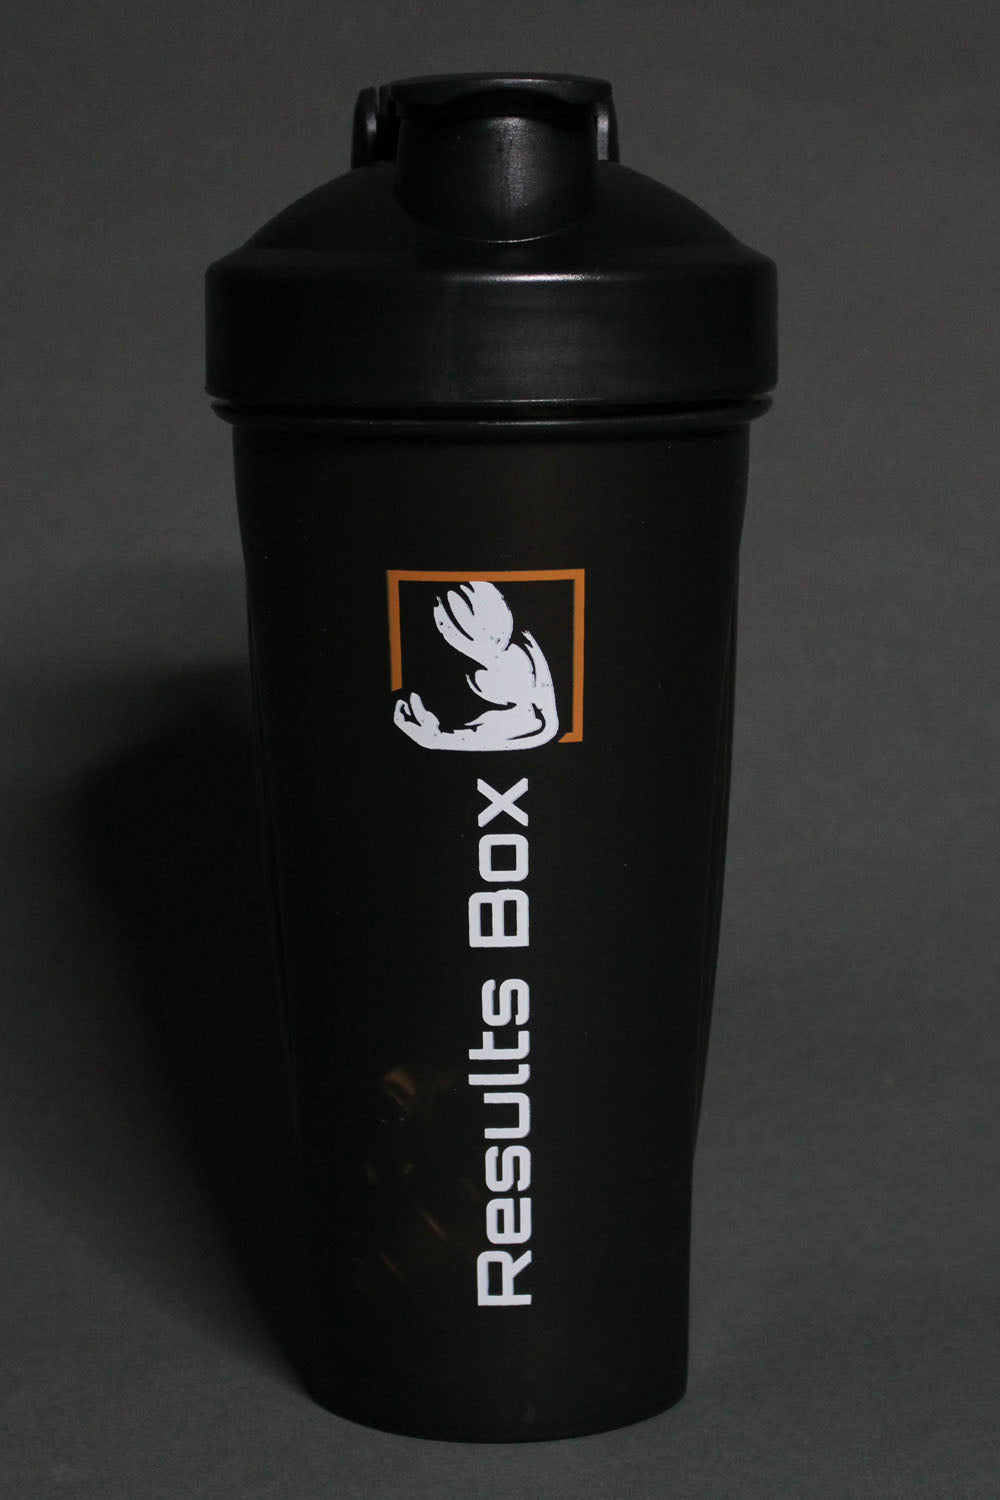 results box 28oz shaker cup for protein powder and pre-workout